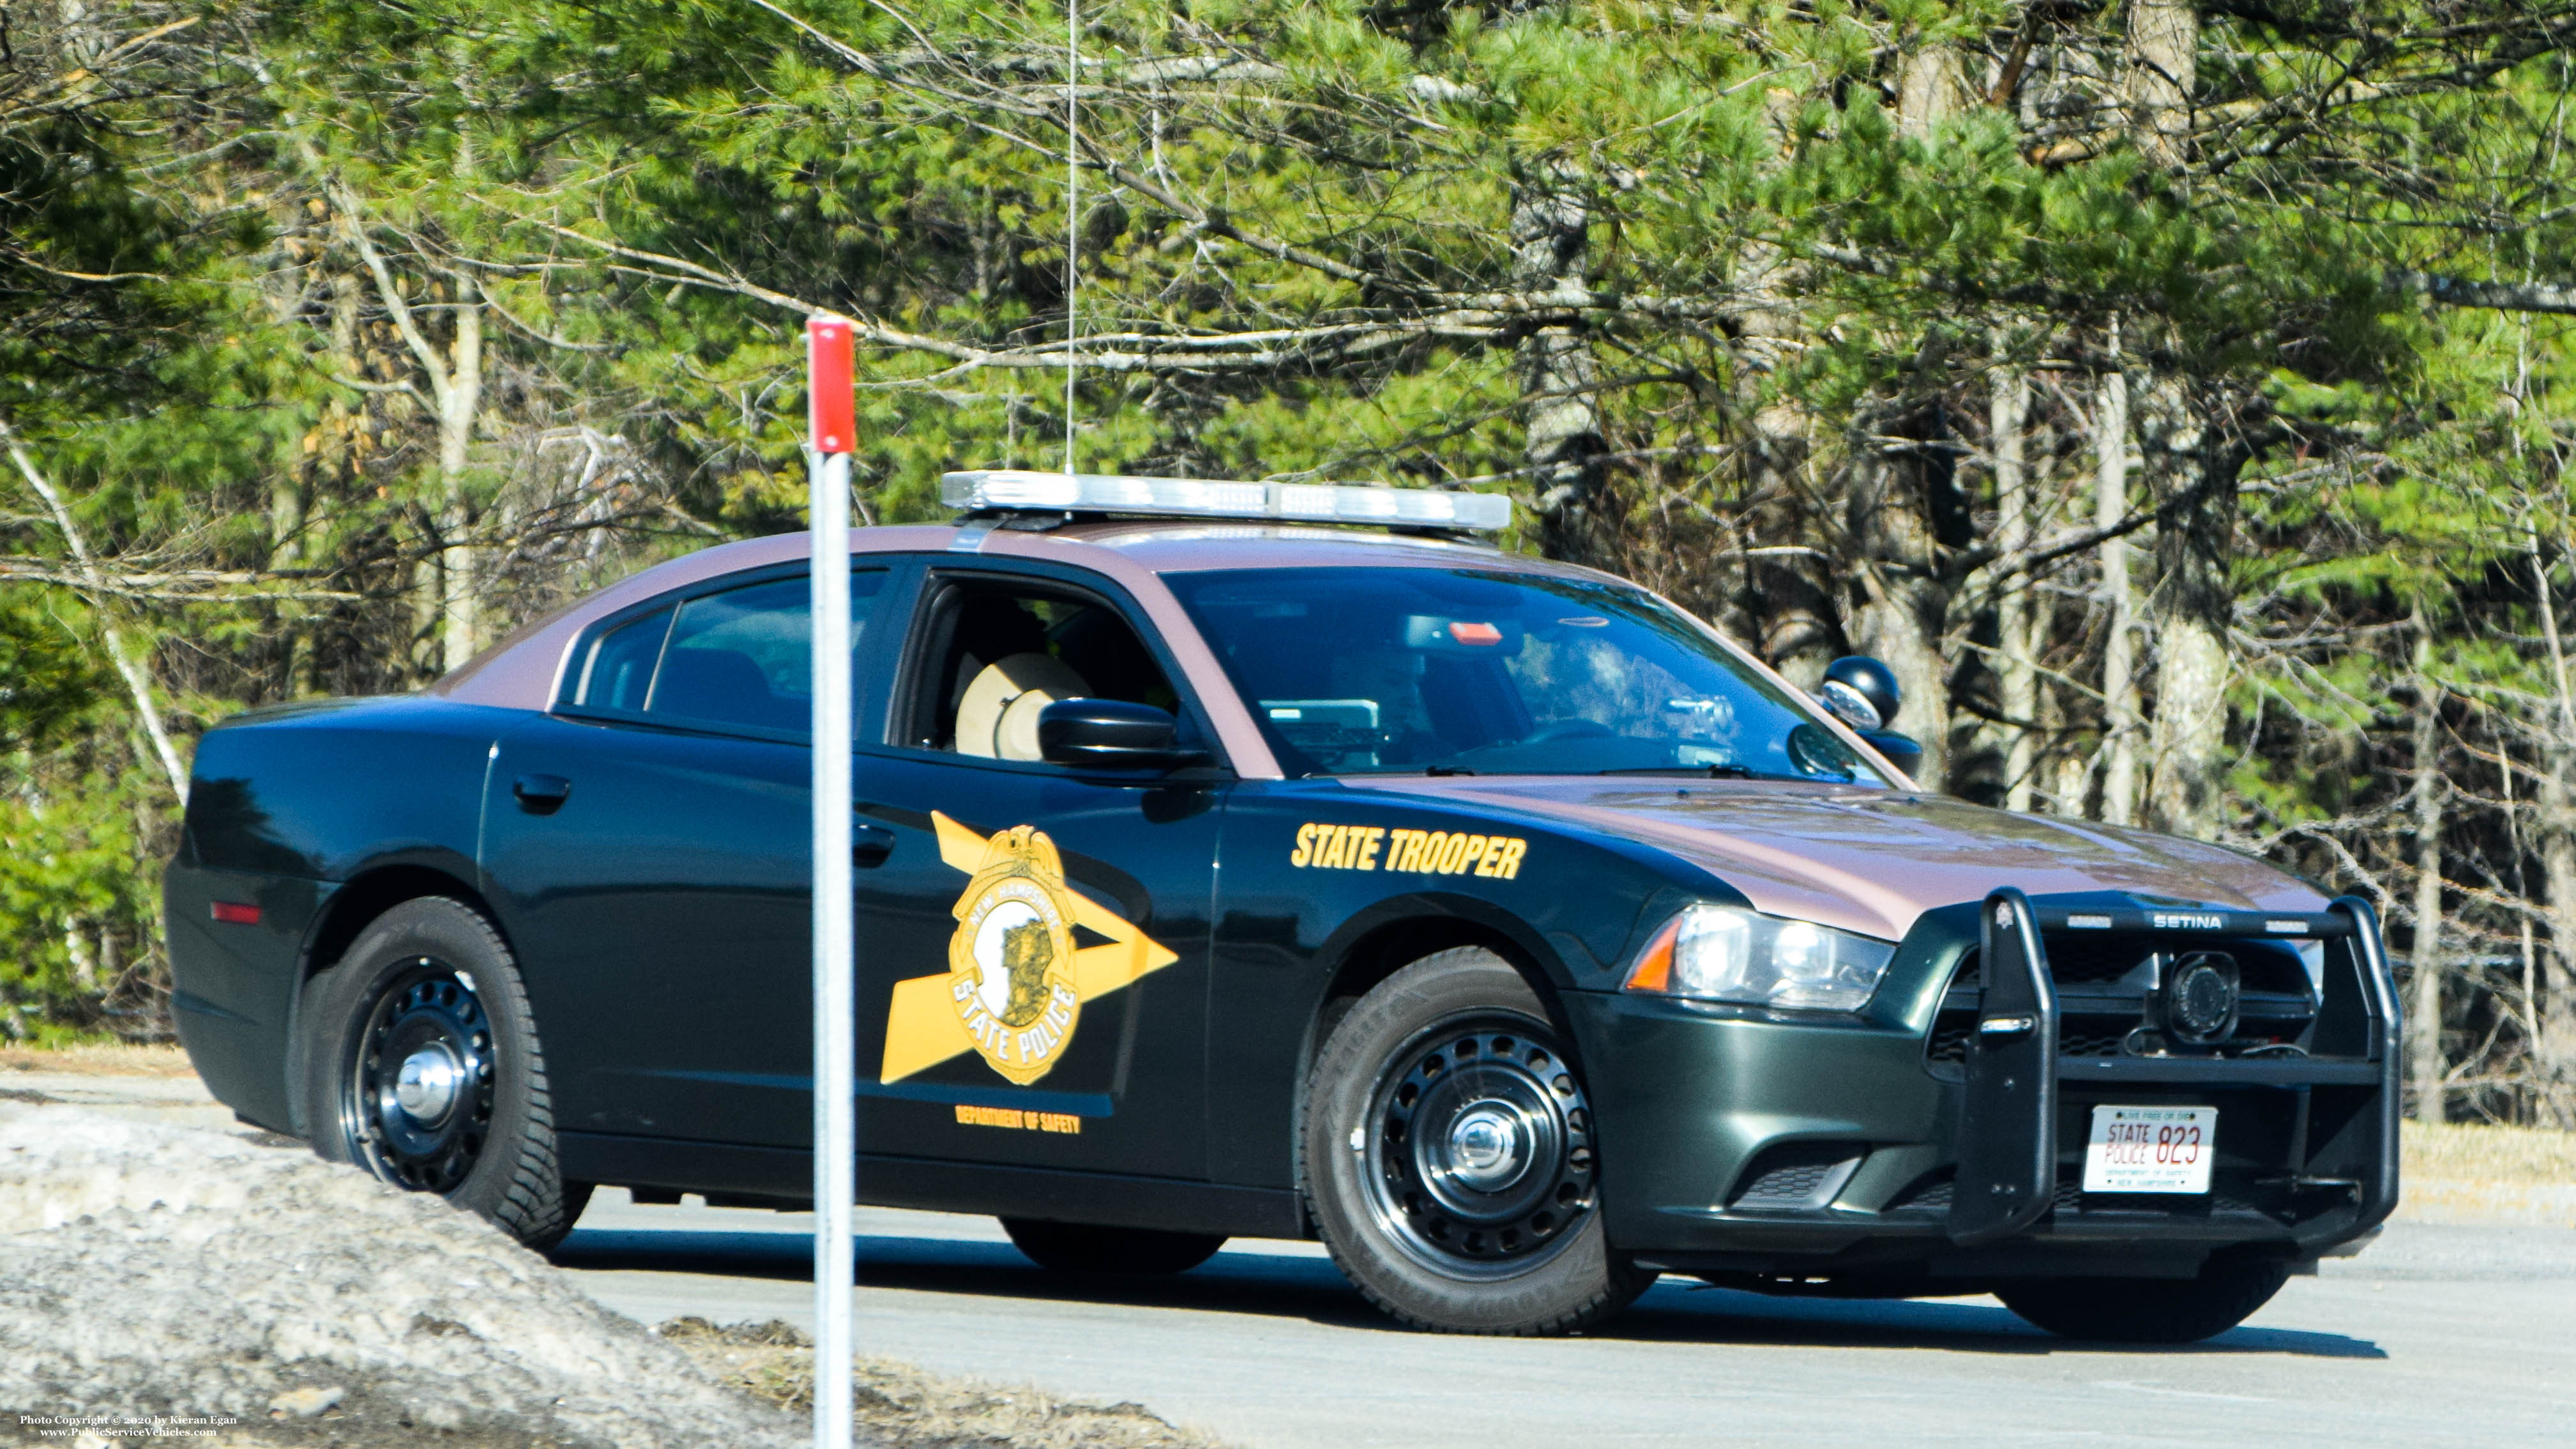 A photo  of New Hampshire State Police
            Cruiser 823, a 2011-2014 Dodge Charger             taken by Kieran Egan